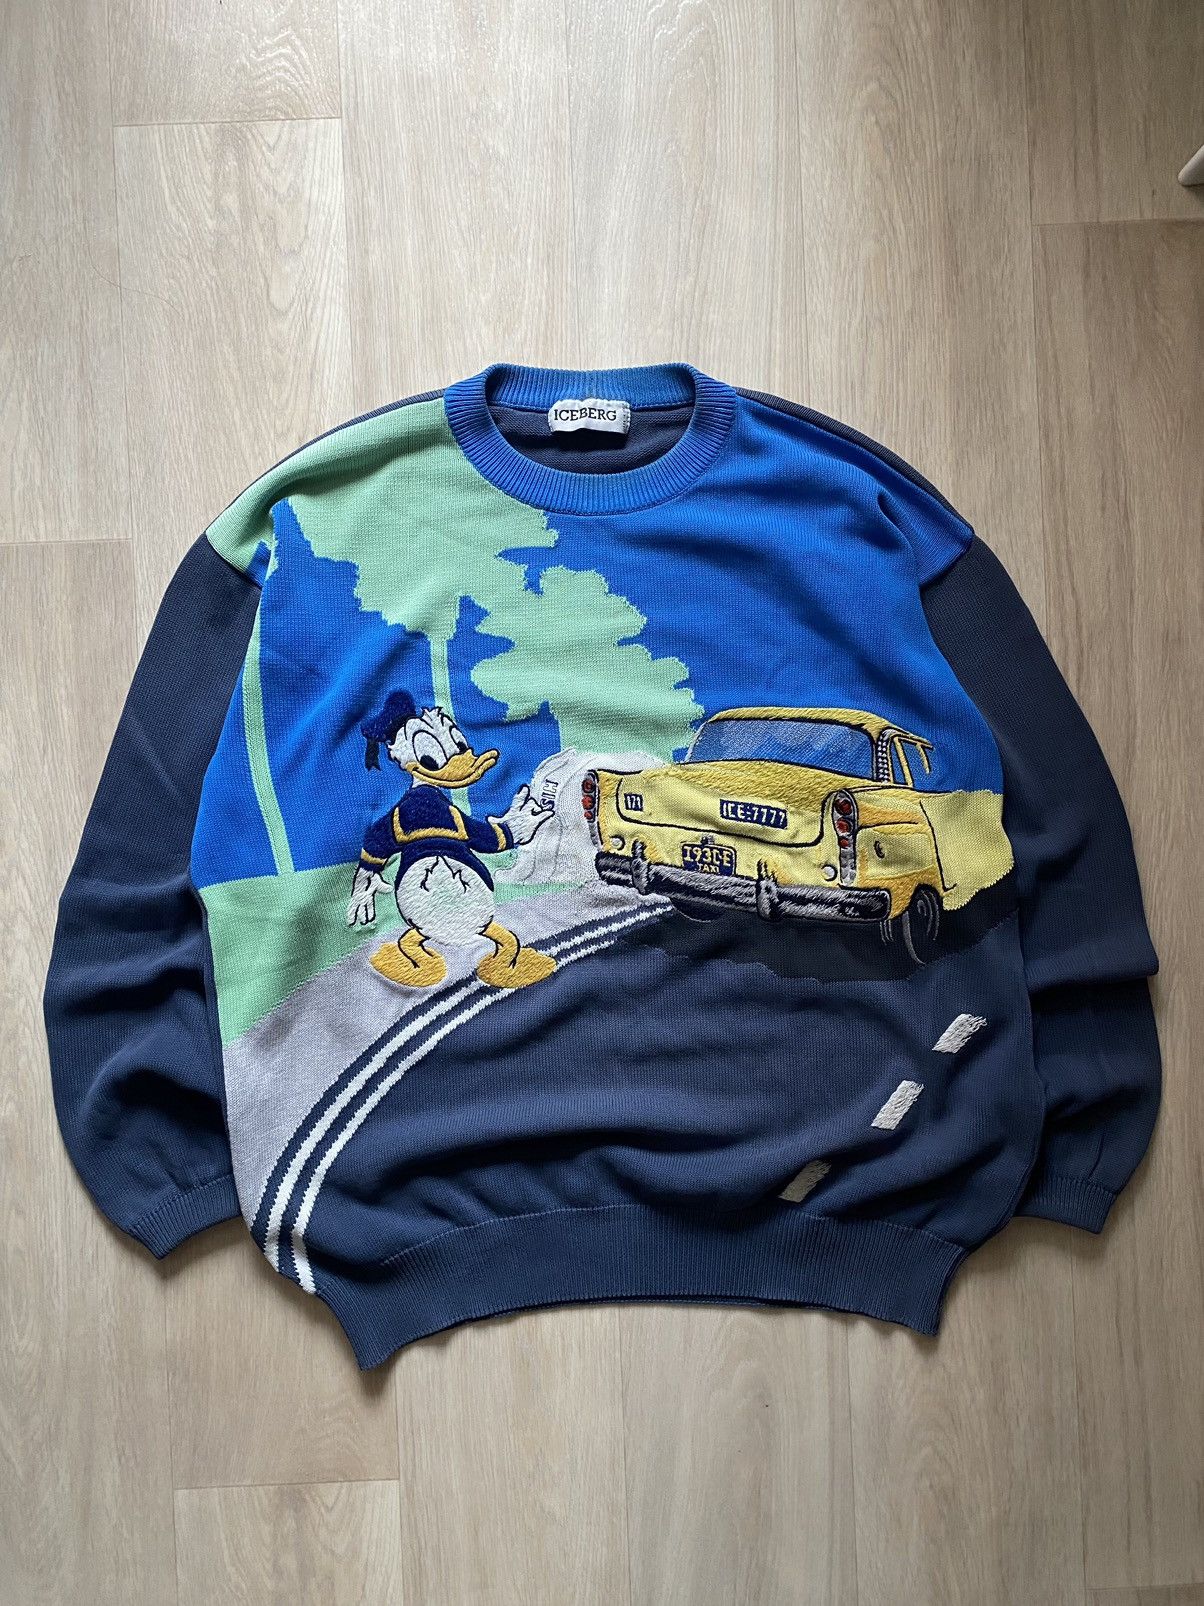 Very Rare Iceberg History Sweater Vintage 1992 Disney 'Donald Duck' Size US XL / EU 56 / 4 - 1 Preview